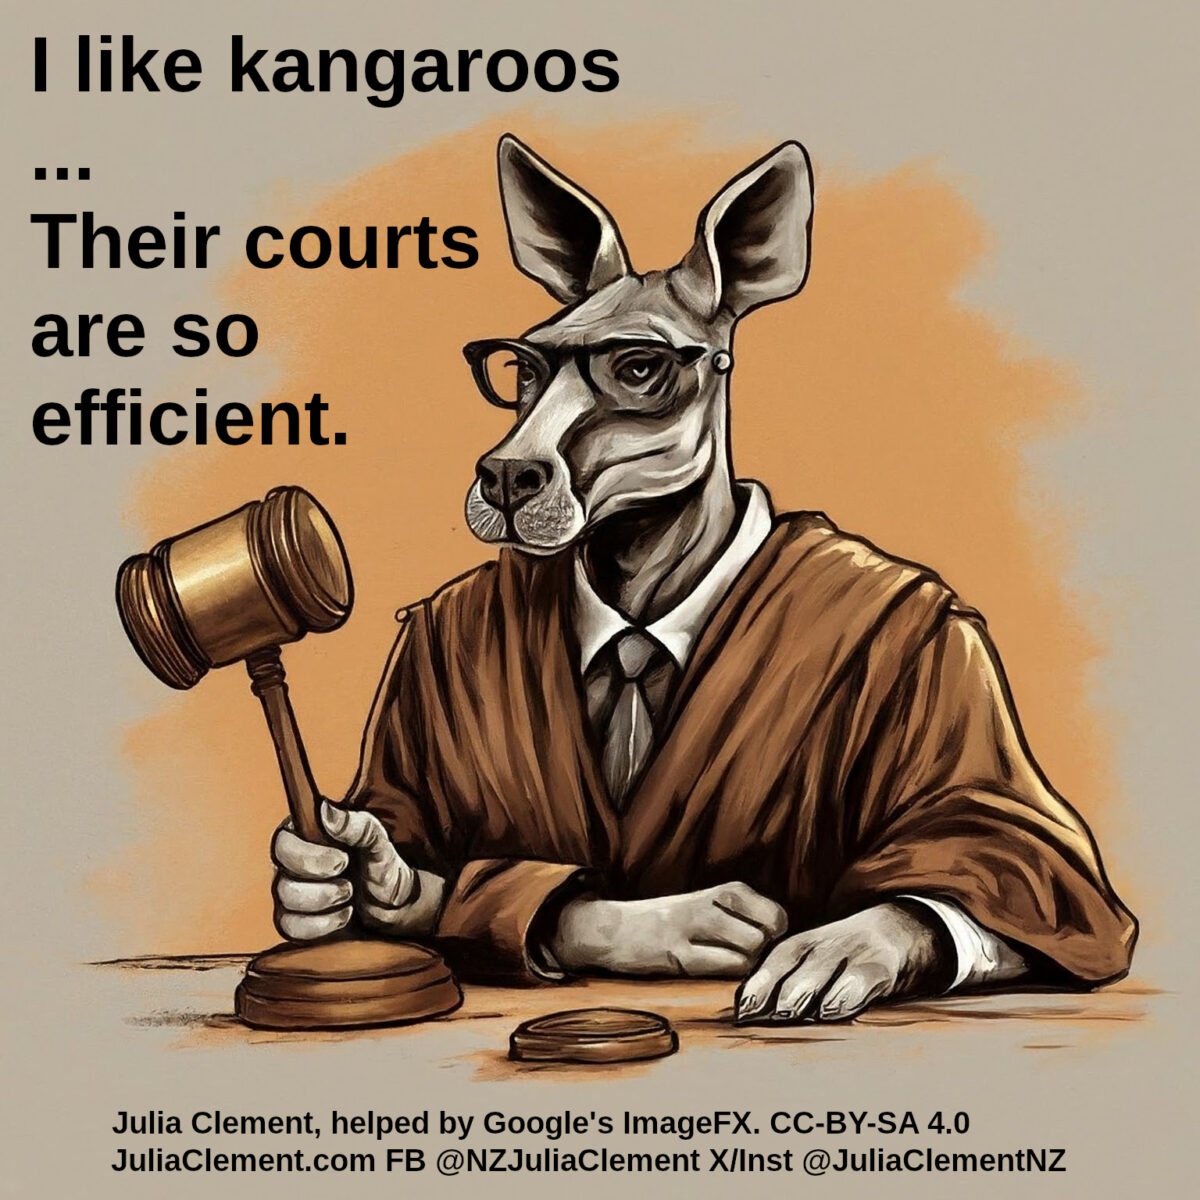 A three handed kangaroo wearing a judge's robe and holding a gavel sits at a desk. Text: I like kangaroos ... Their courts are so efficient.